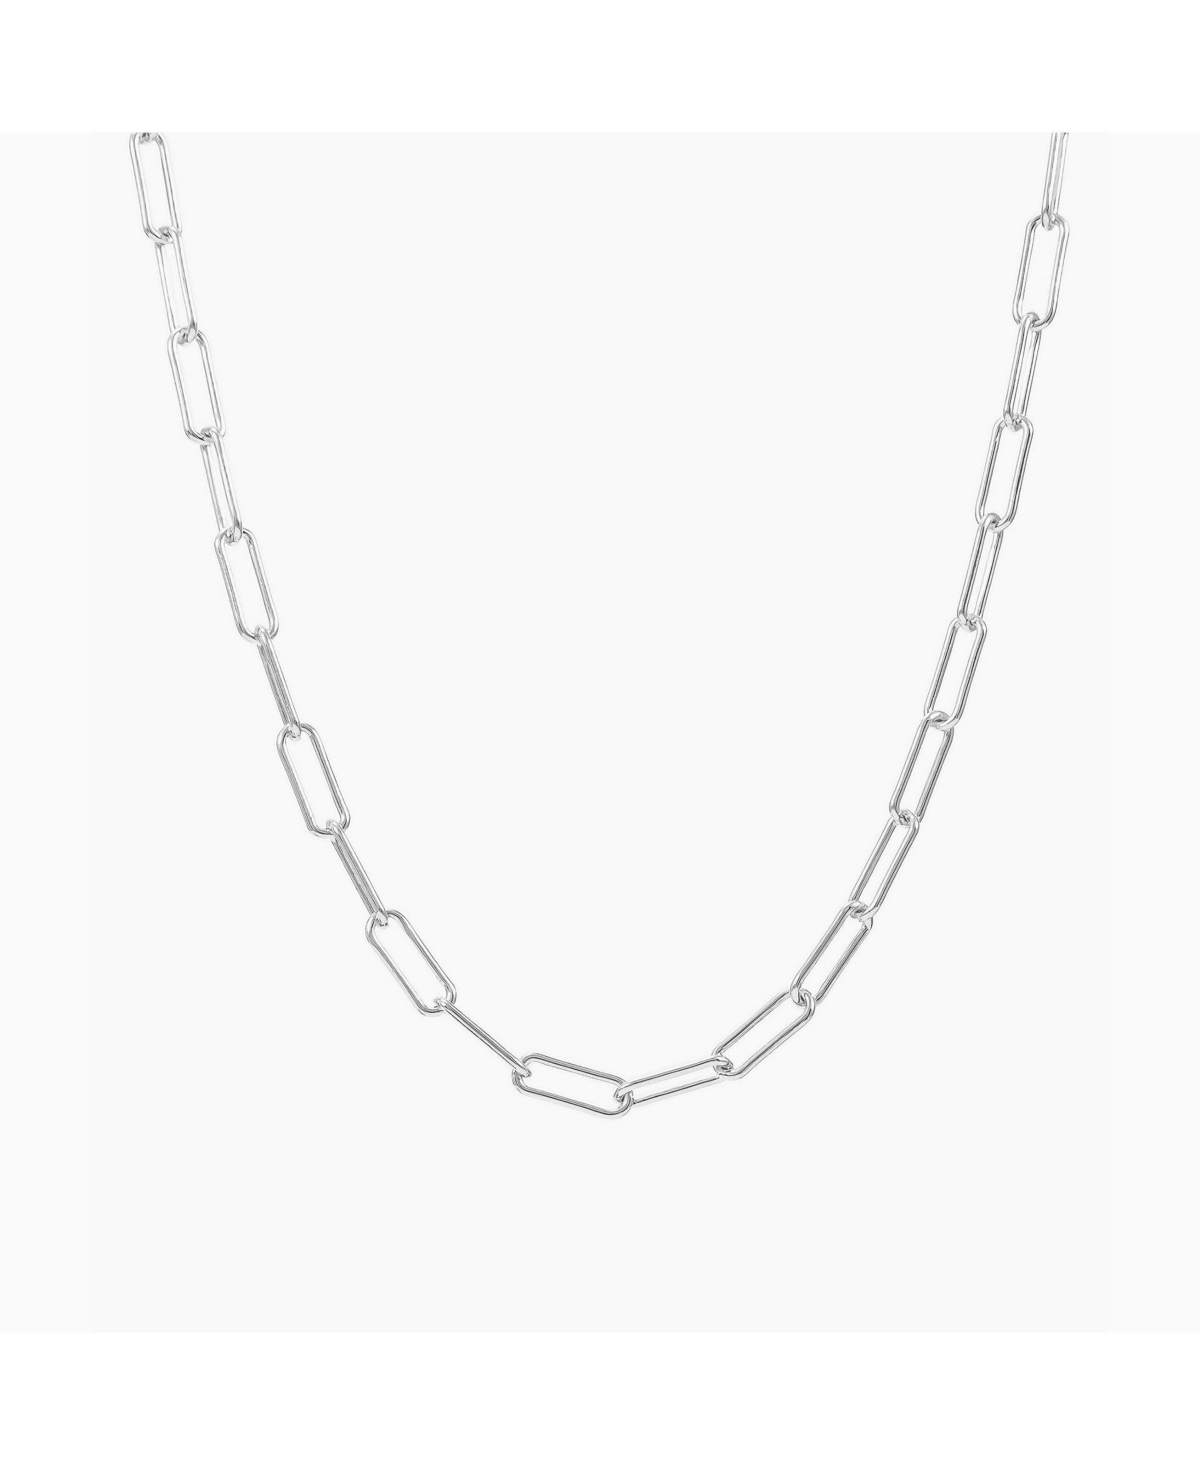 Amelia Chain Statement Necklace - Silver